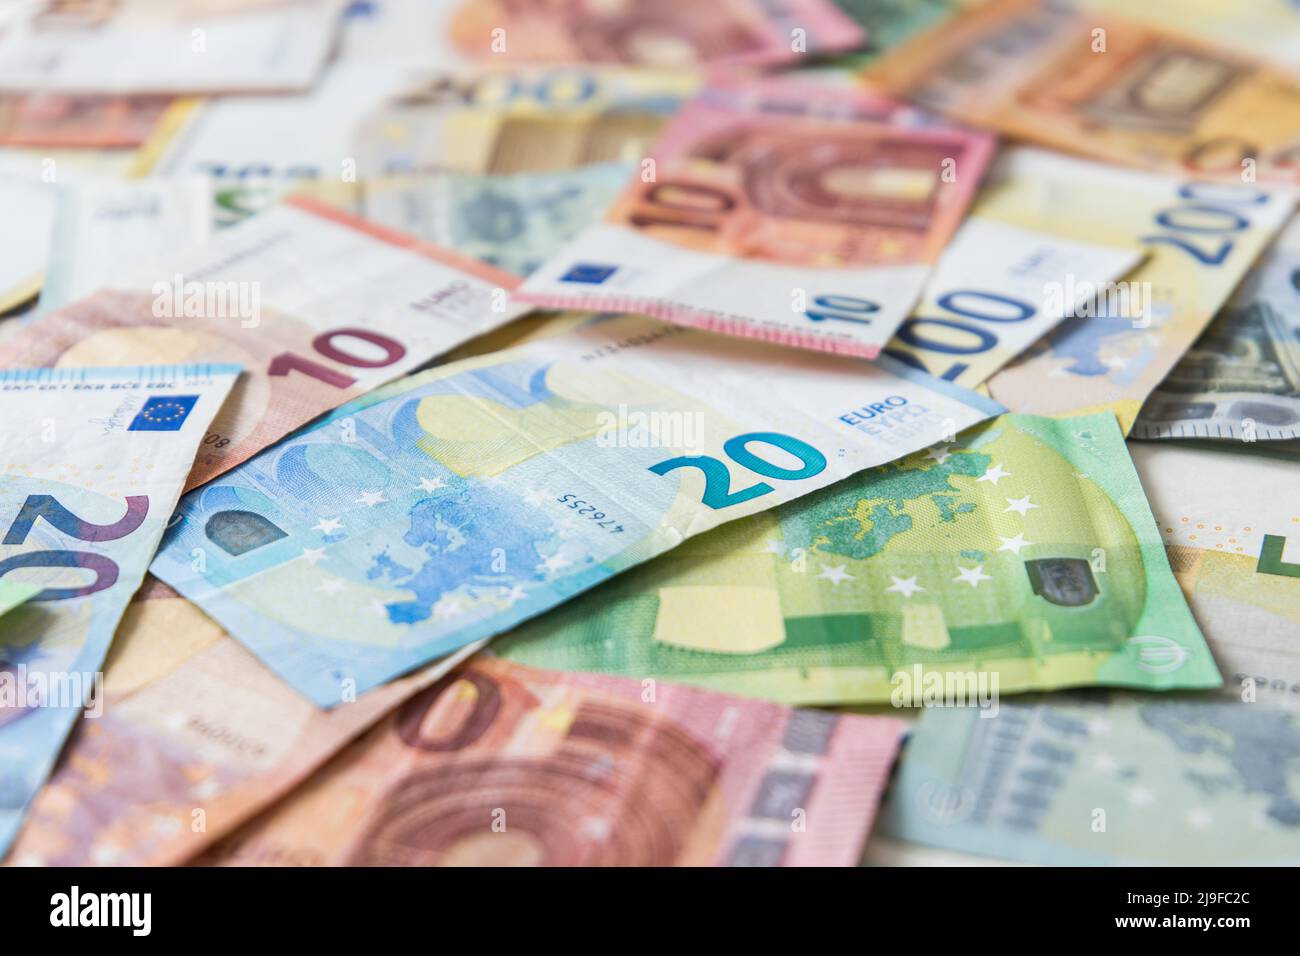 Lots of different Euro banknotes shown as a mess Stock Photo